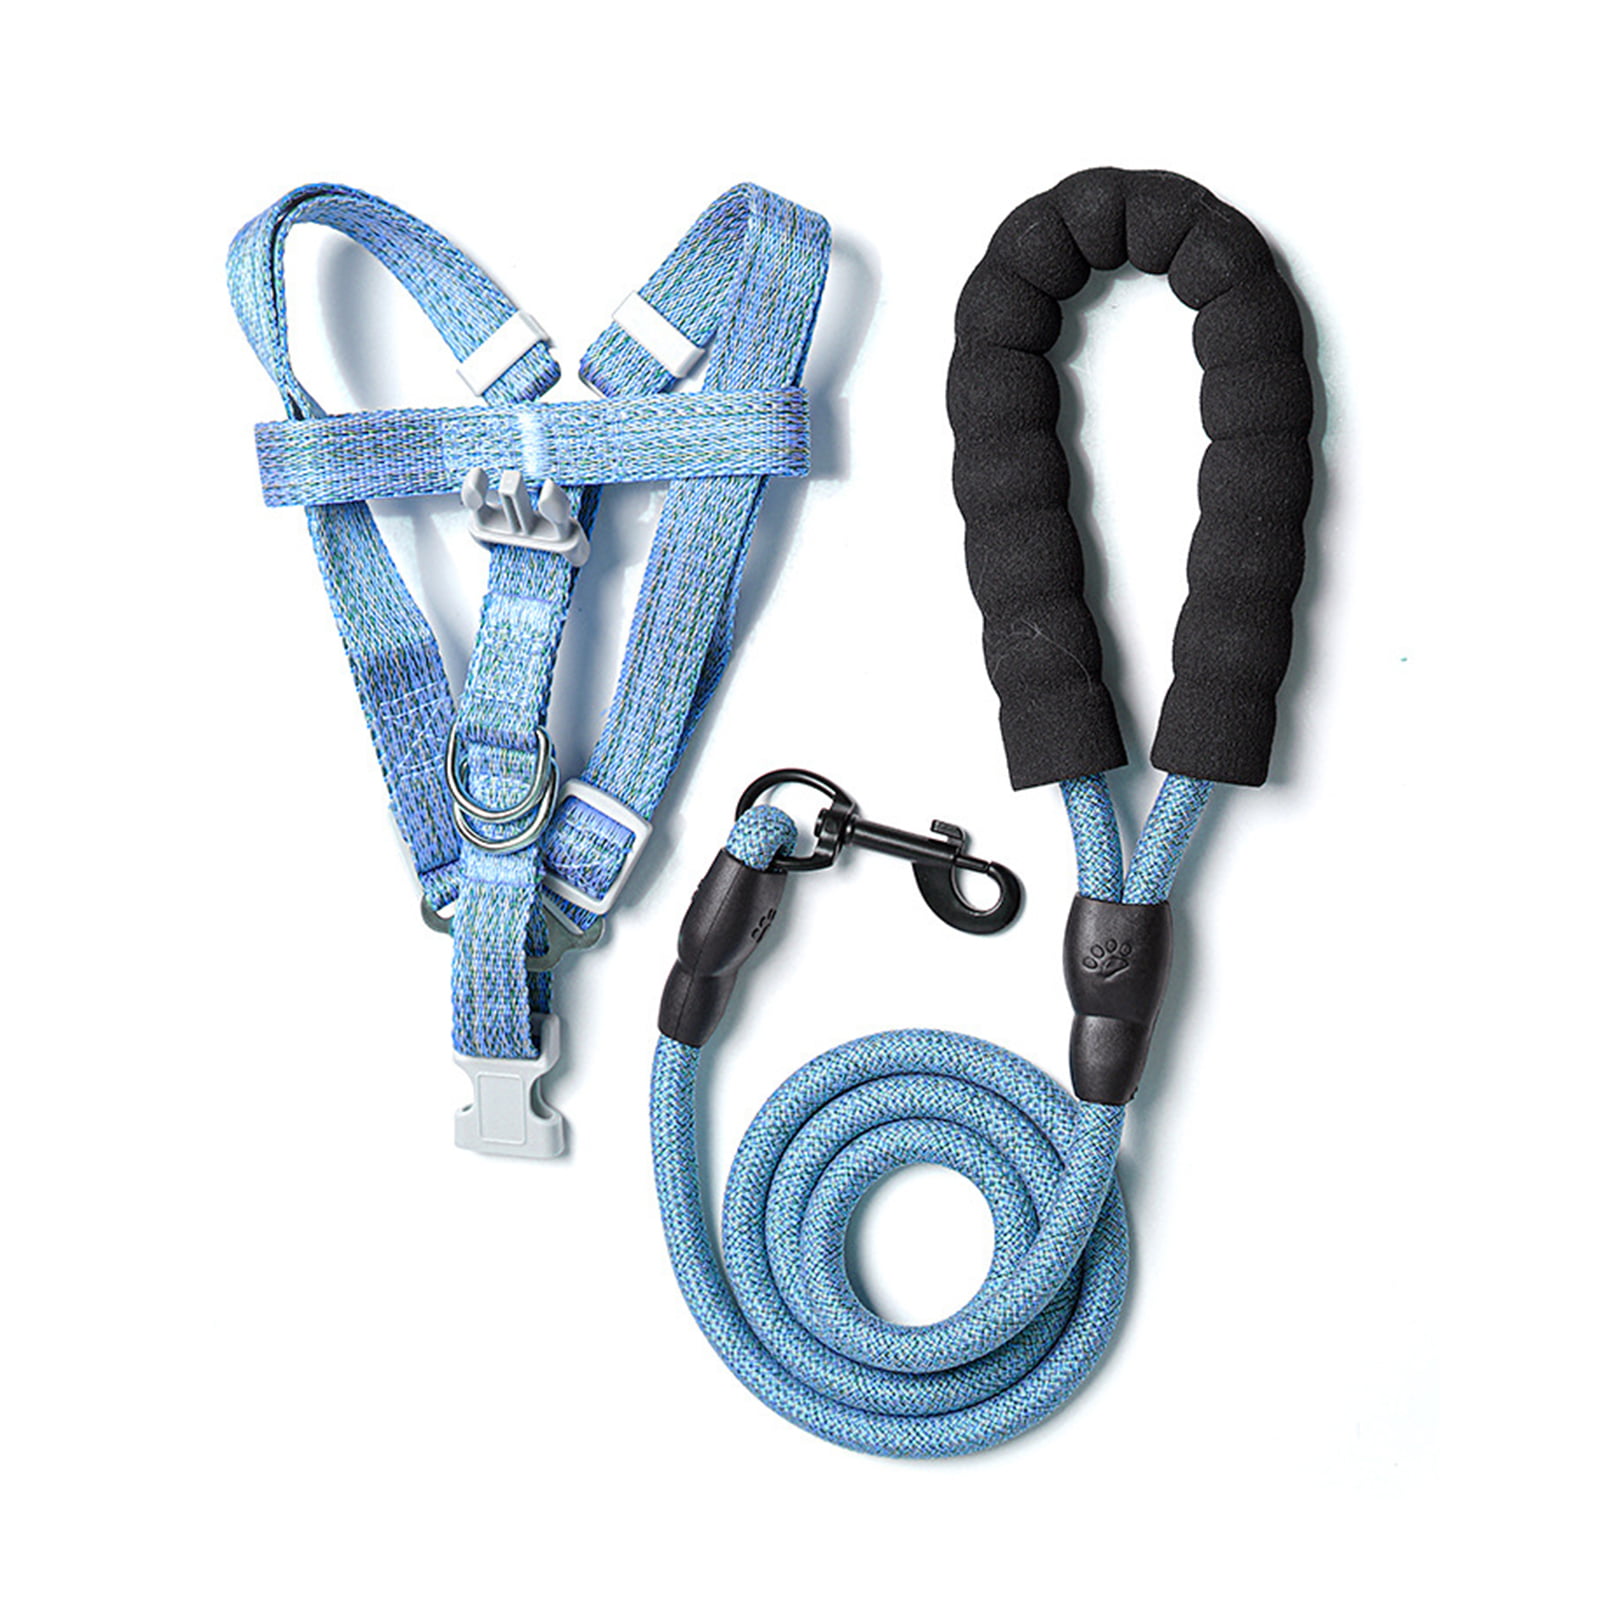 2Pcs/Set Dog Harness and Leash Set Harness and Leash Set Adjustable  Escape-Proof Harness and Leash Set for Small Medium Dodgs and Cats 